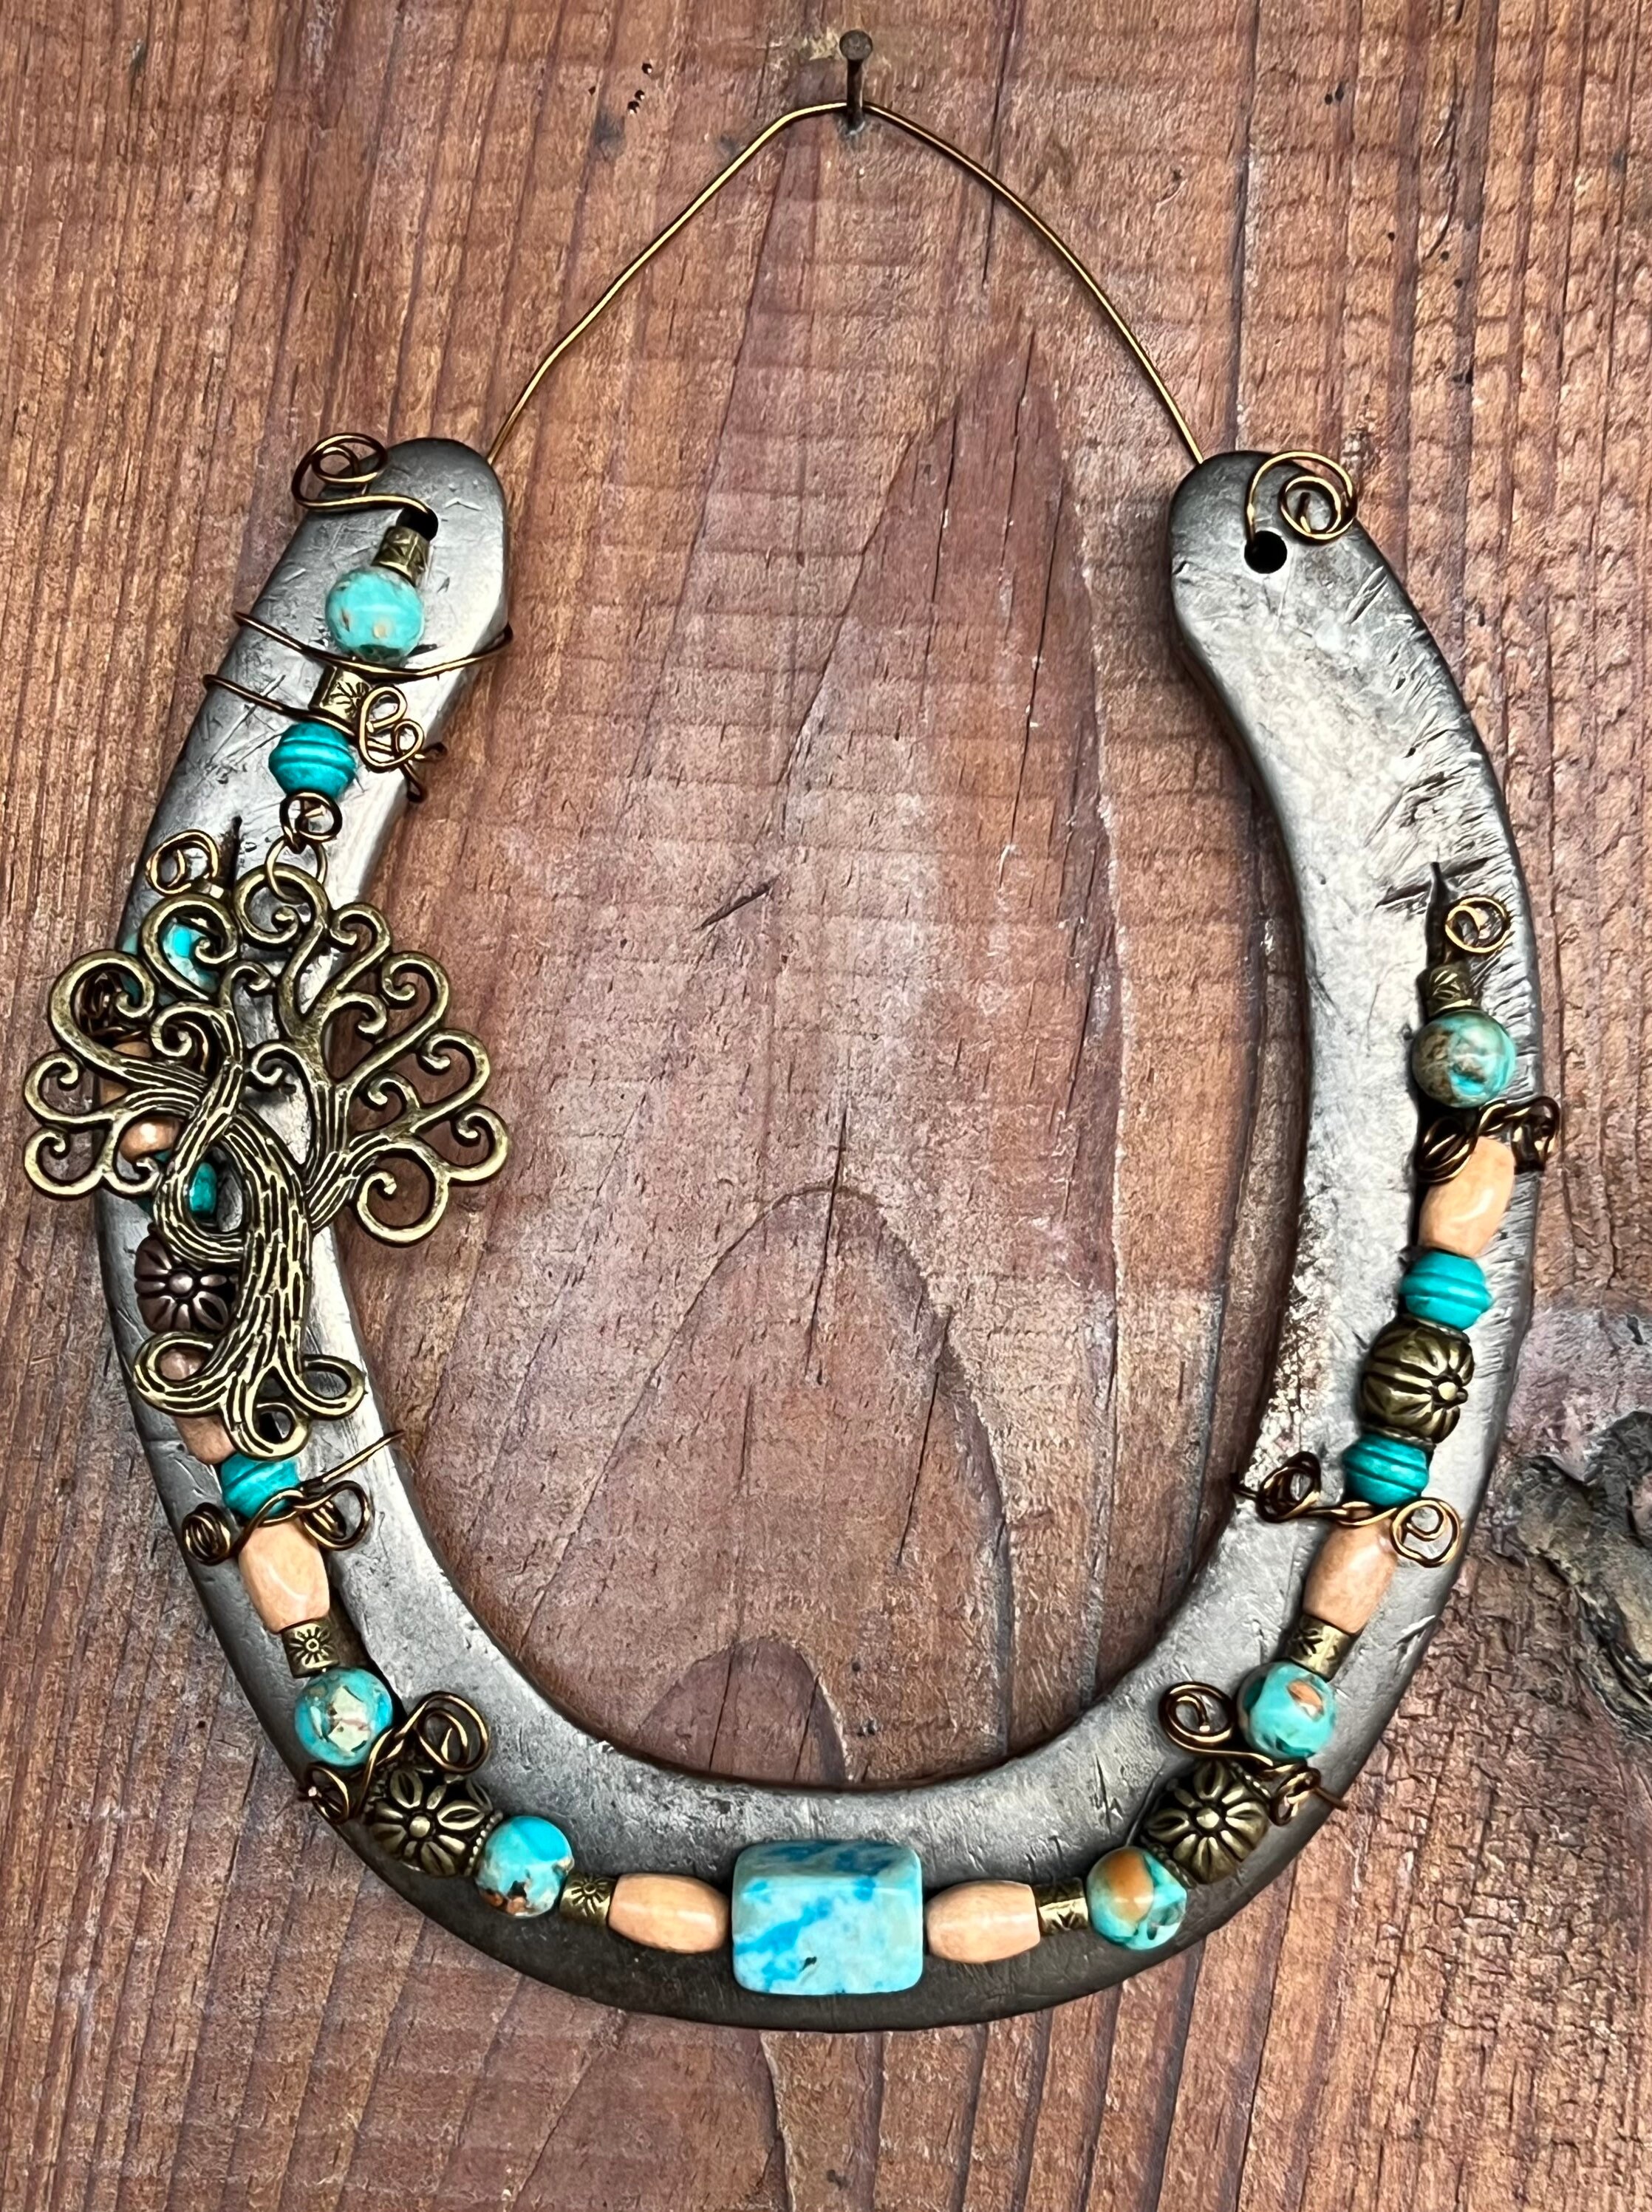 Hand Decorated horseshoe wall hanging. Upcycled, green glass bead